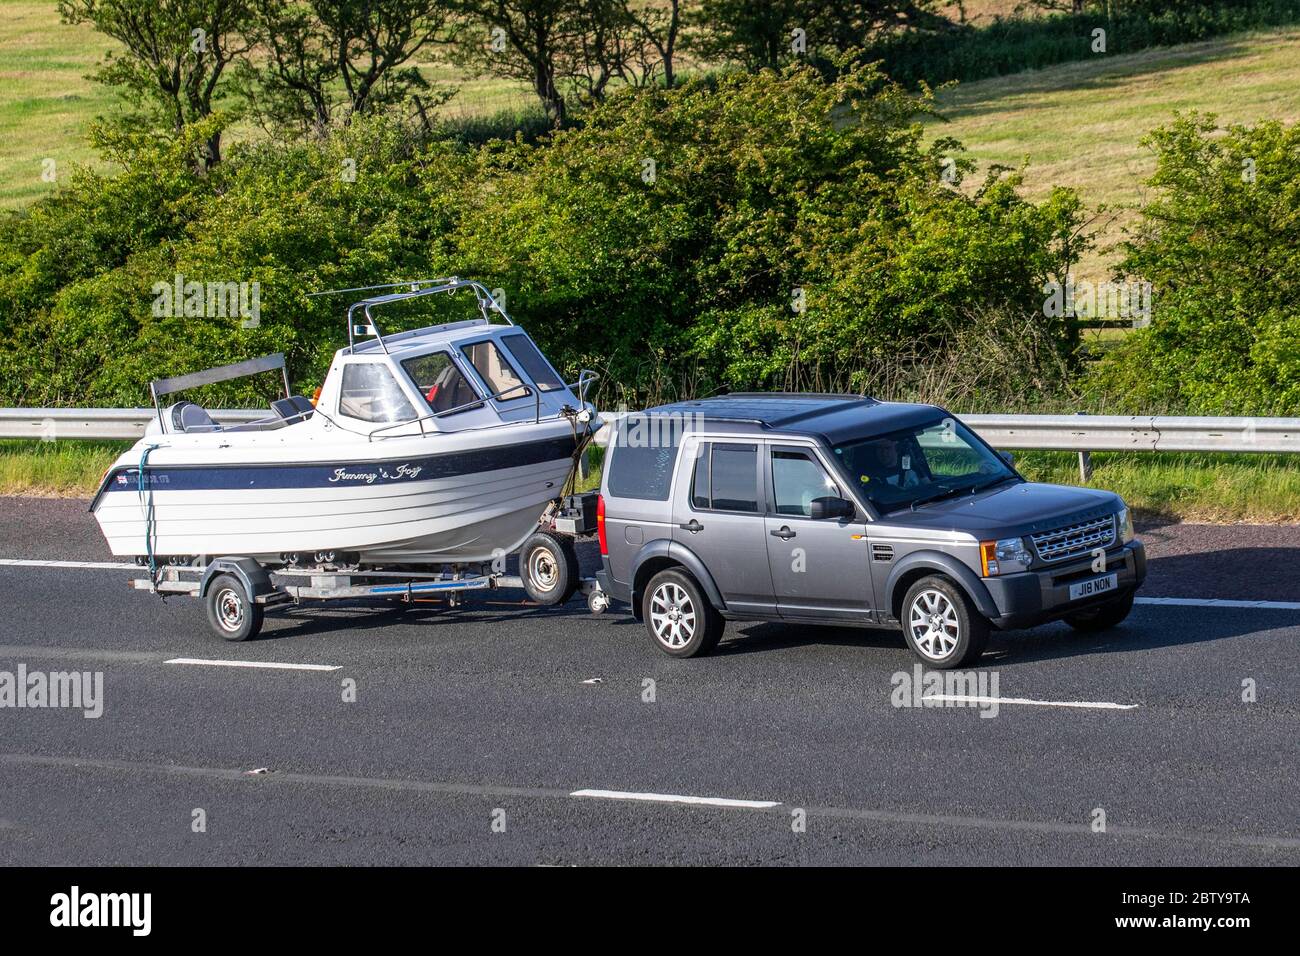 2005 grey Land Rover Discovery 3 TDV6 towing Warrior 175 Jimmy's Joy boat & trailer; Vehicular traffic moving vehicles, cars driving vehicle on UK roads, motors, motoring on the M6 motorway highway Stock Photo